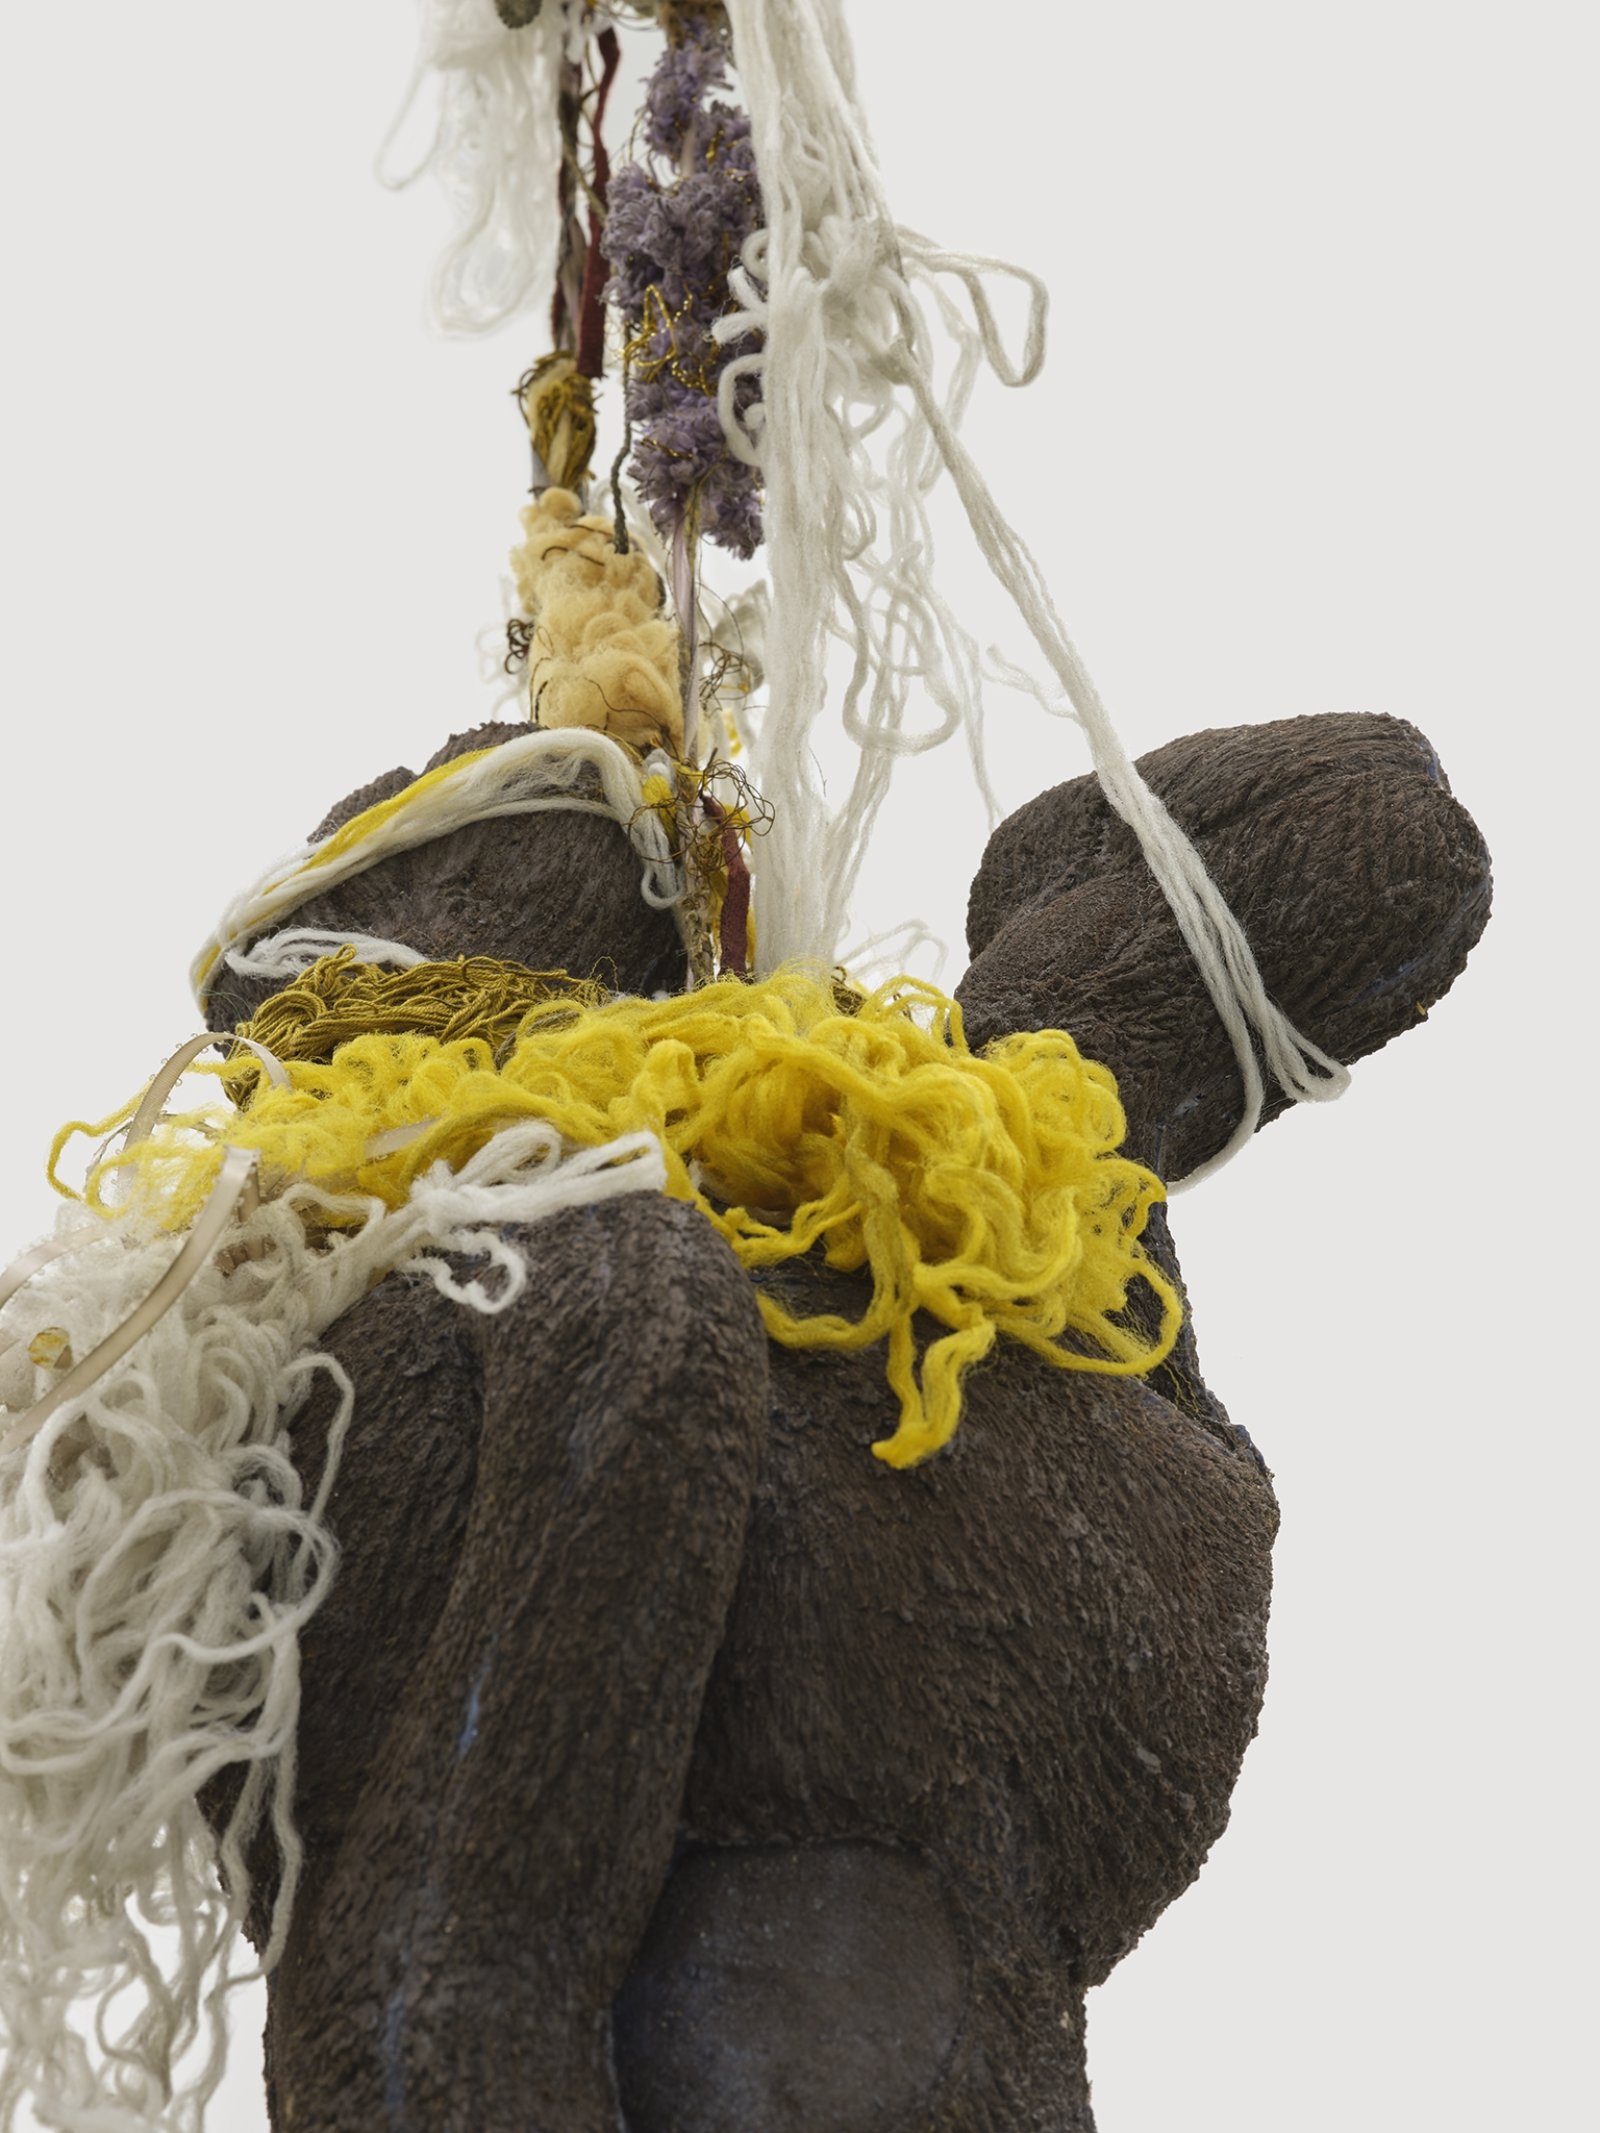 Liz Magor, Delivery (brown) (detail), 2018, silicone rubber, textiles, twine, 144 x 25 x 21 in. (366 x 62 x 52 cm)